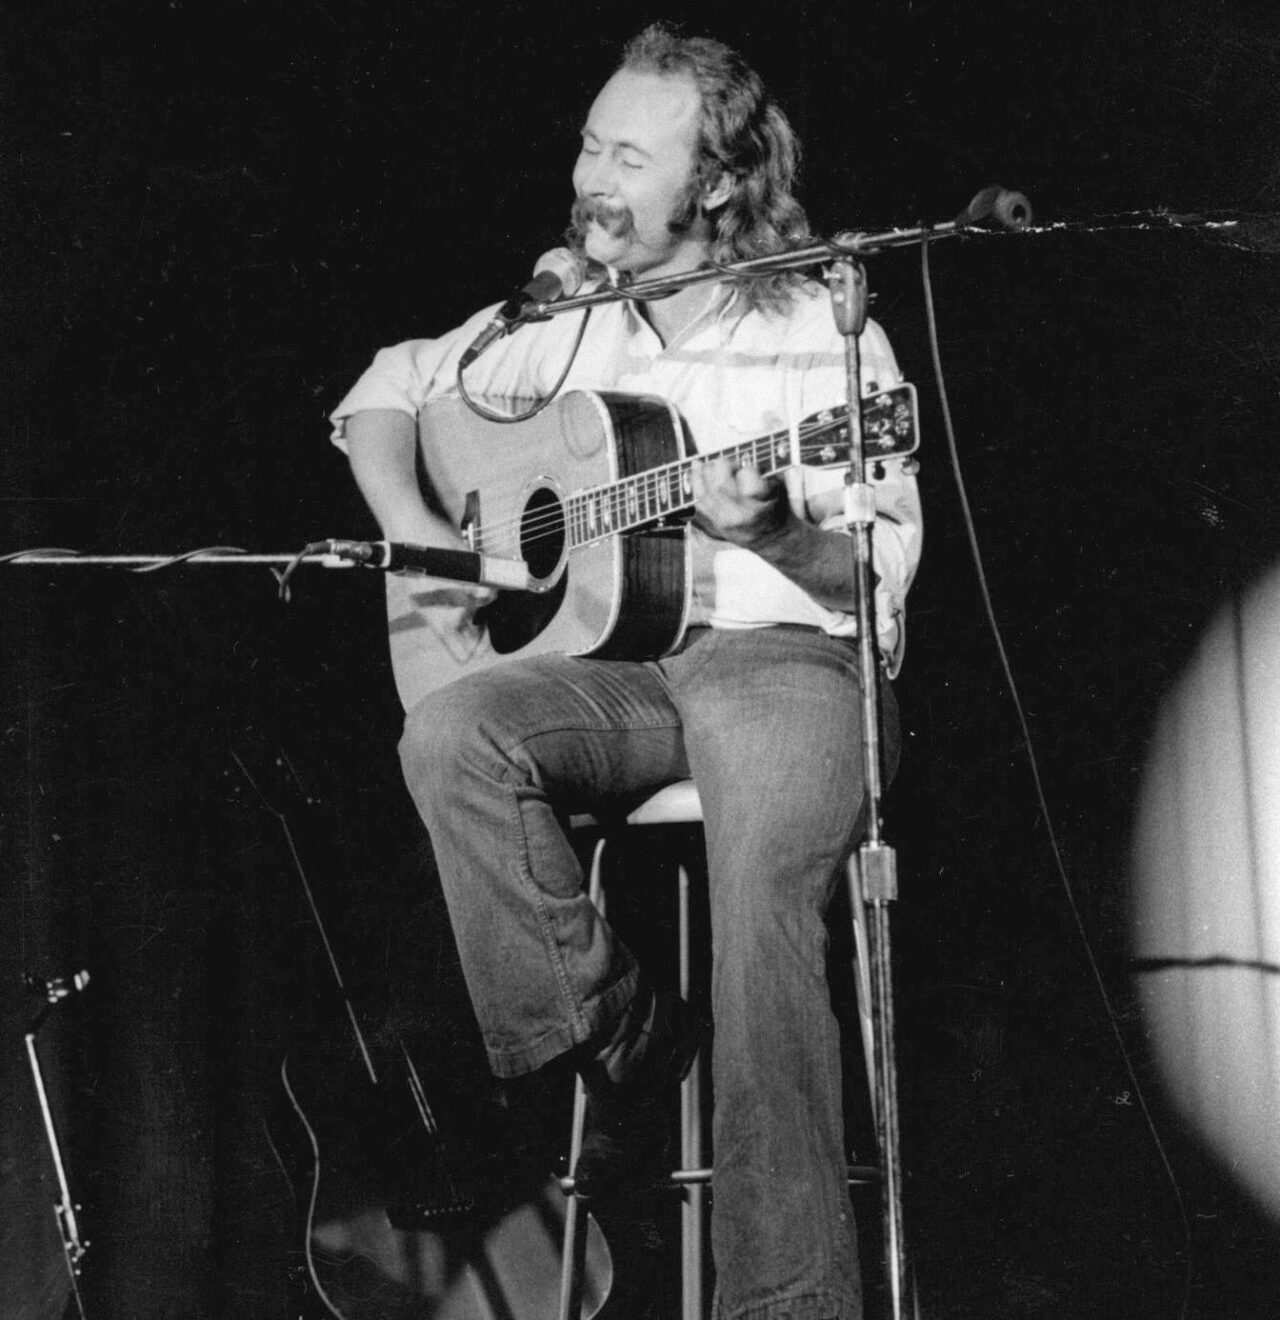 A male musician with long hair sits on a stool on stage, strumming an acoustic guitar and singing into a standing microphone.